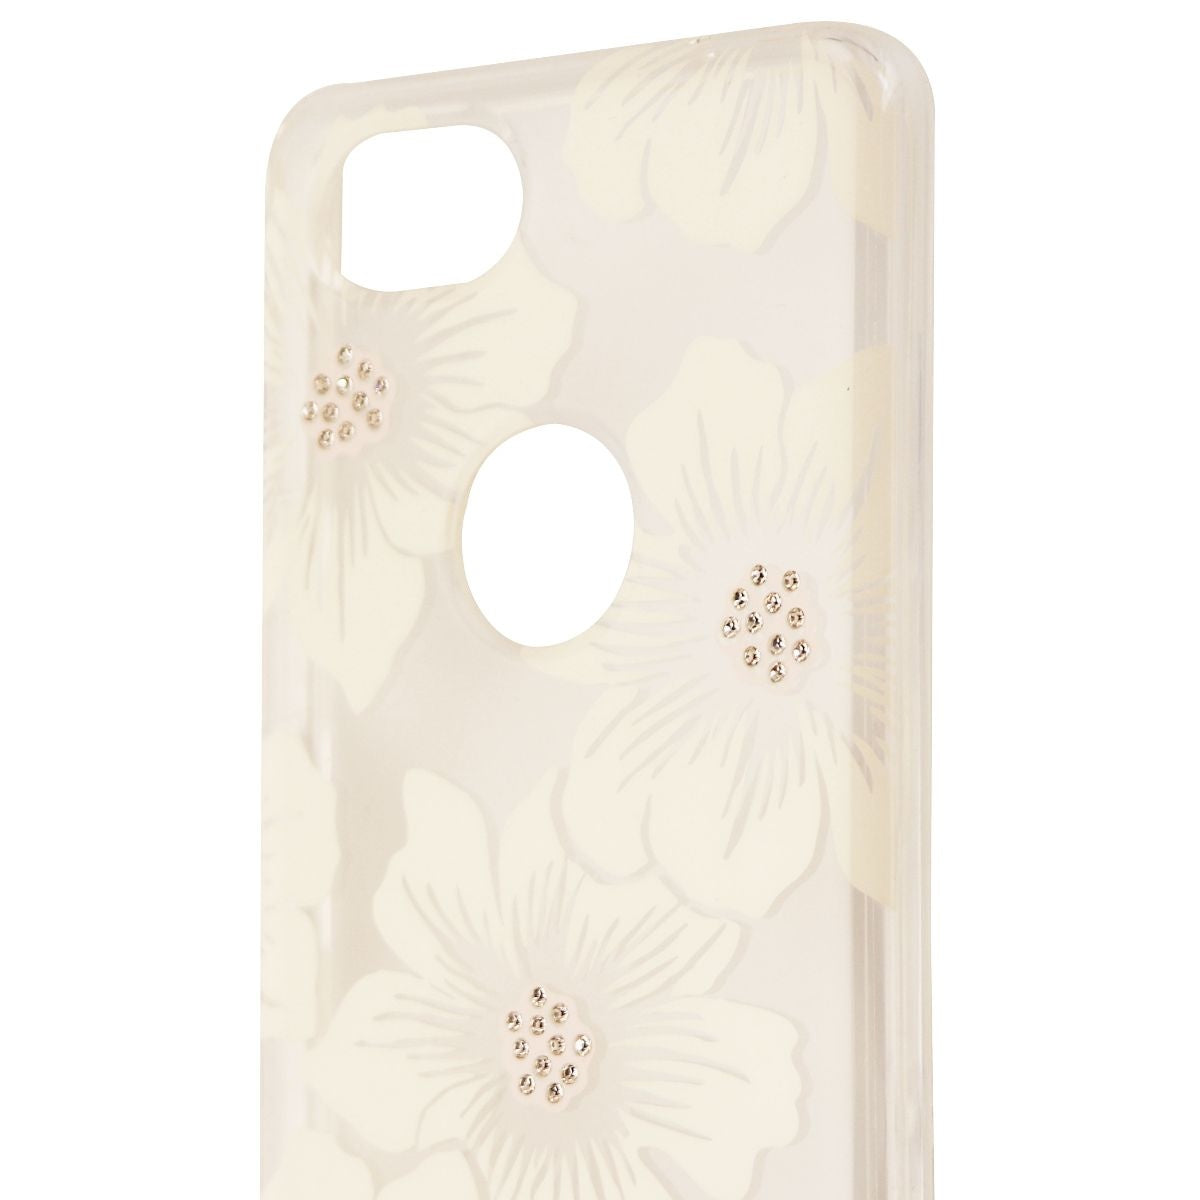 Kate Spade New York Hardshell Case for Google Pixel 2 - Clear/White Flowers Cell Phone - Cases, Covers & Skins Kate Spade    - Simple Cell Bulk Wholesale Pricing - USA Seller